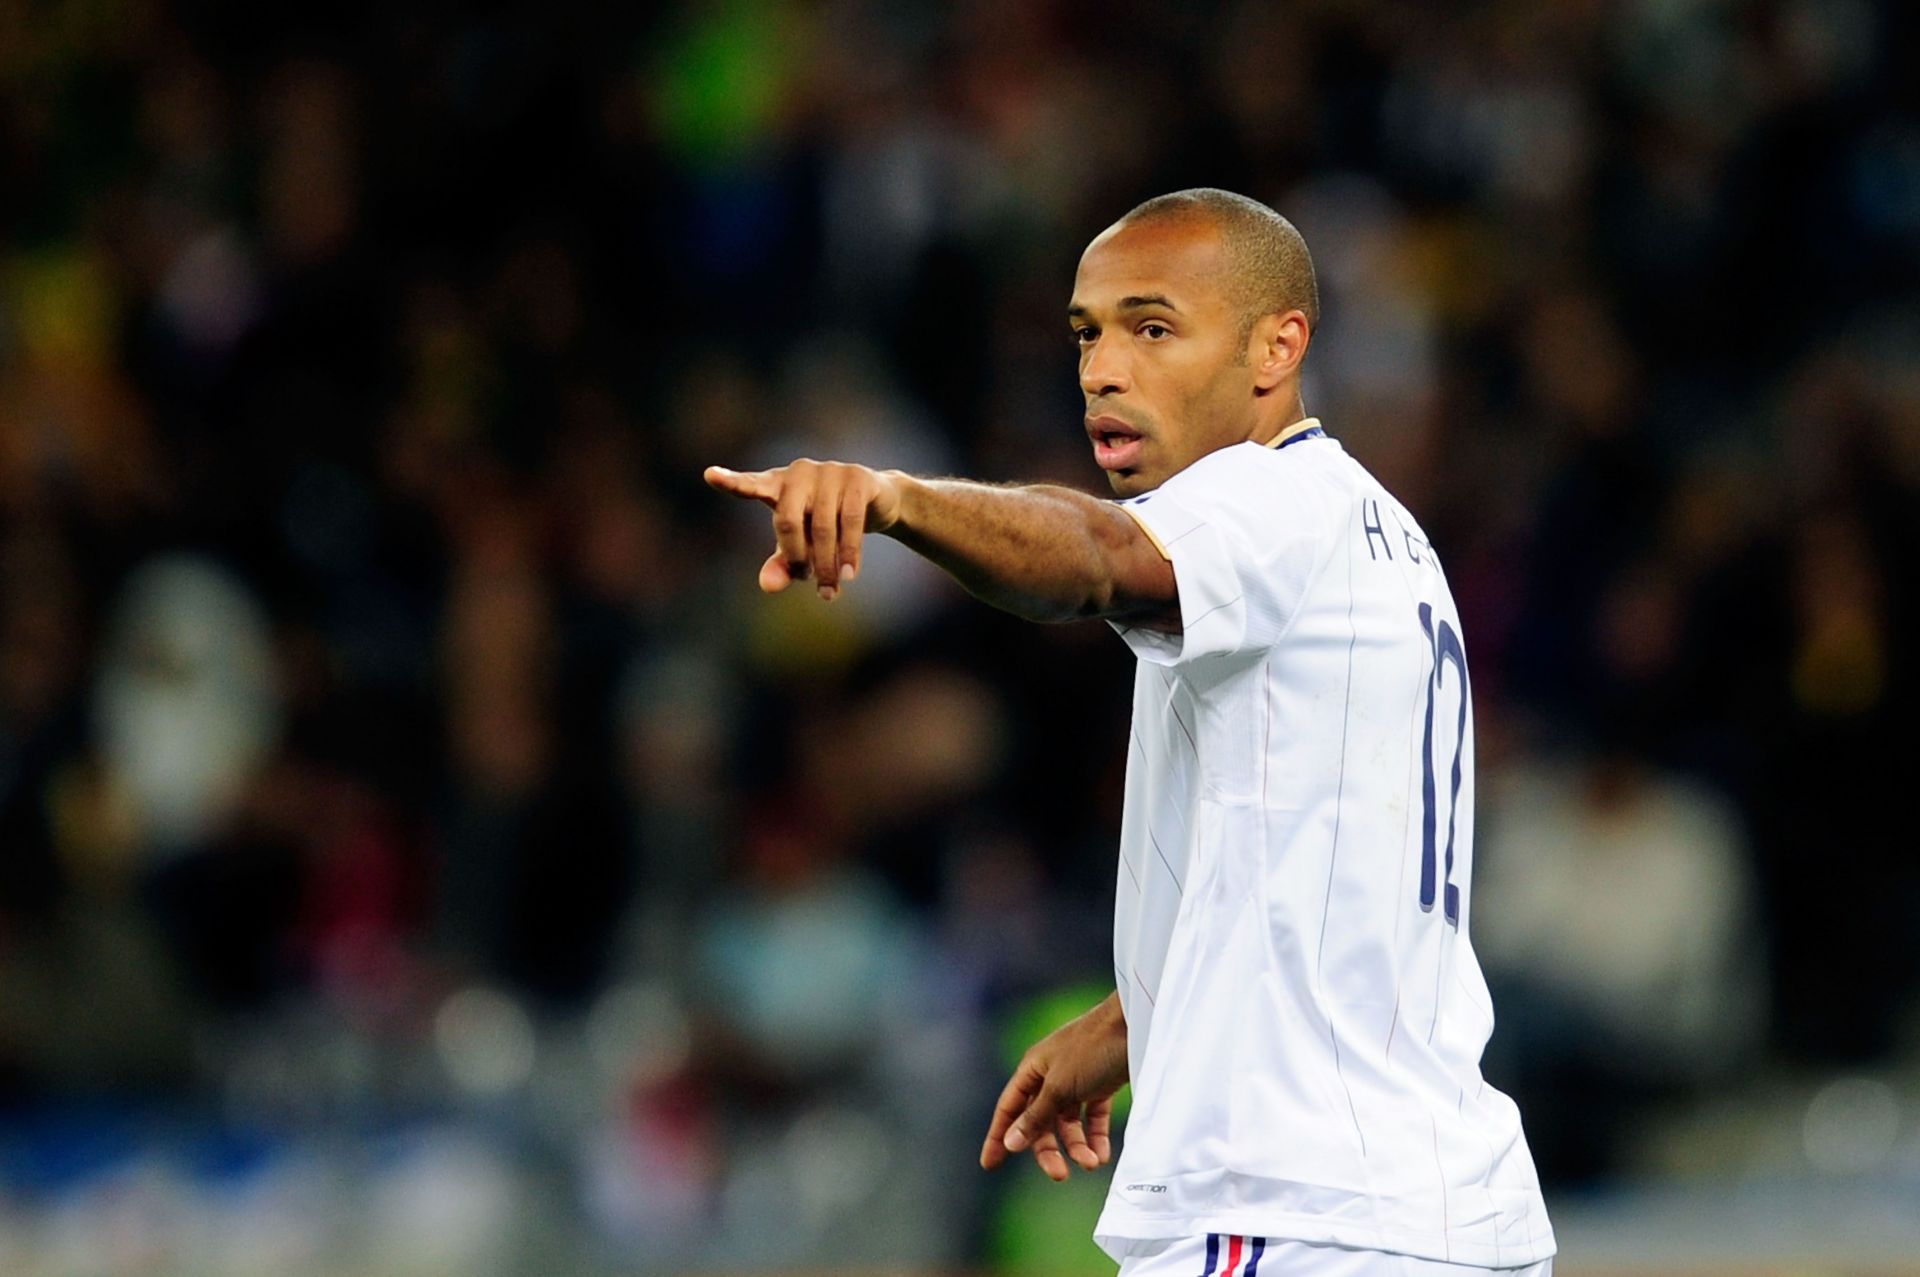 Thierry Henry is one of the most loved foreigners in the history of the Premier League